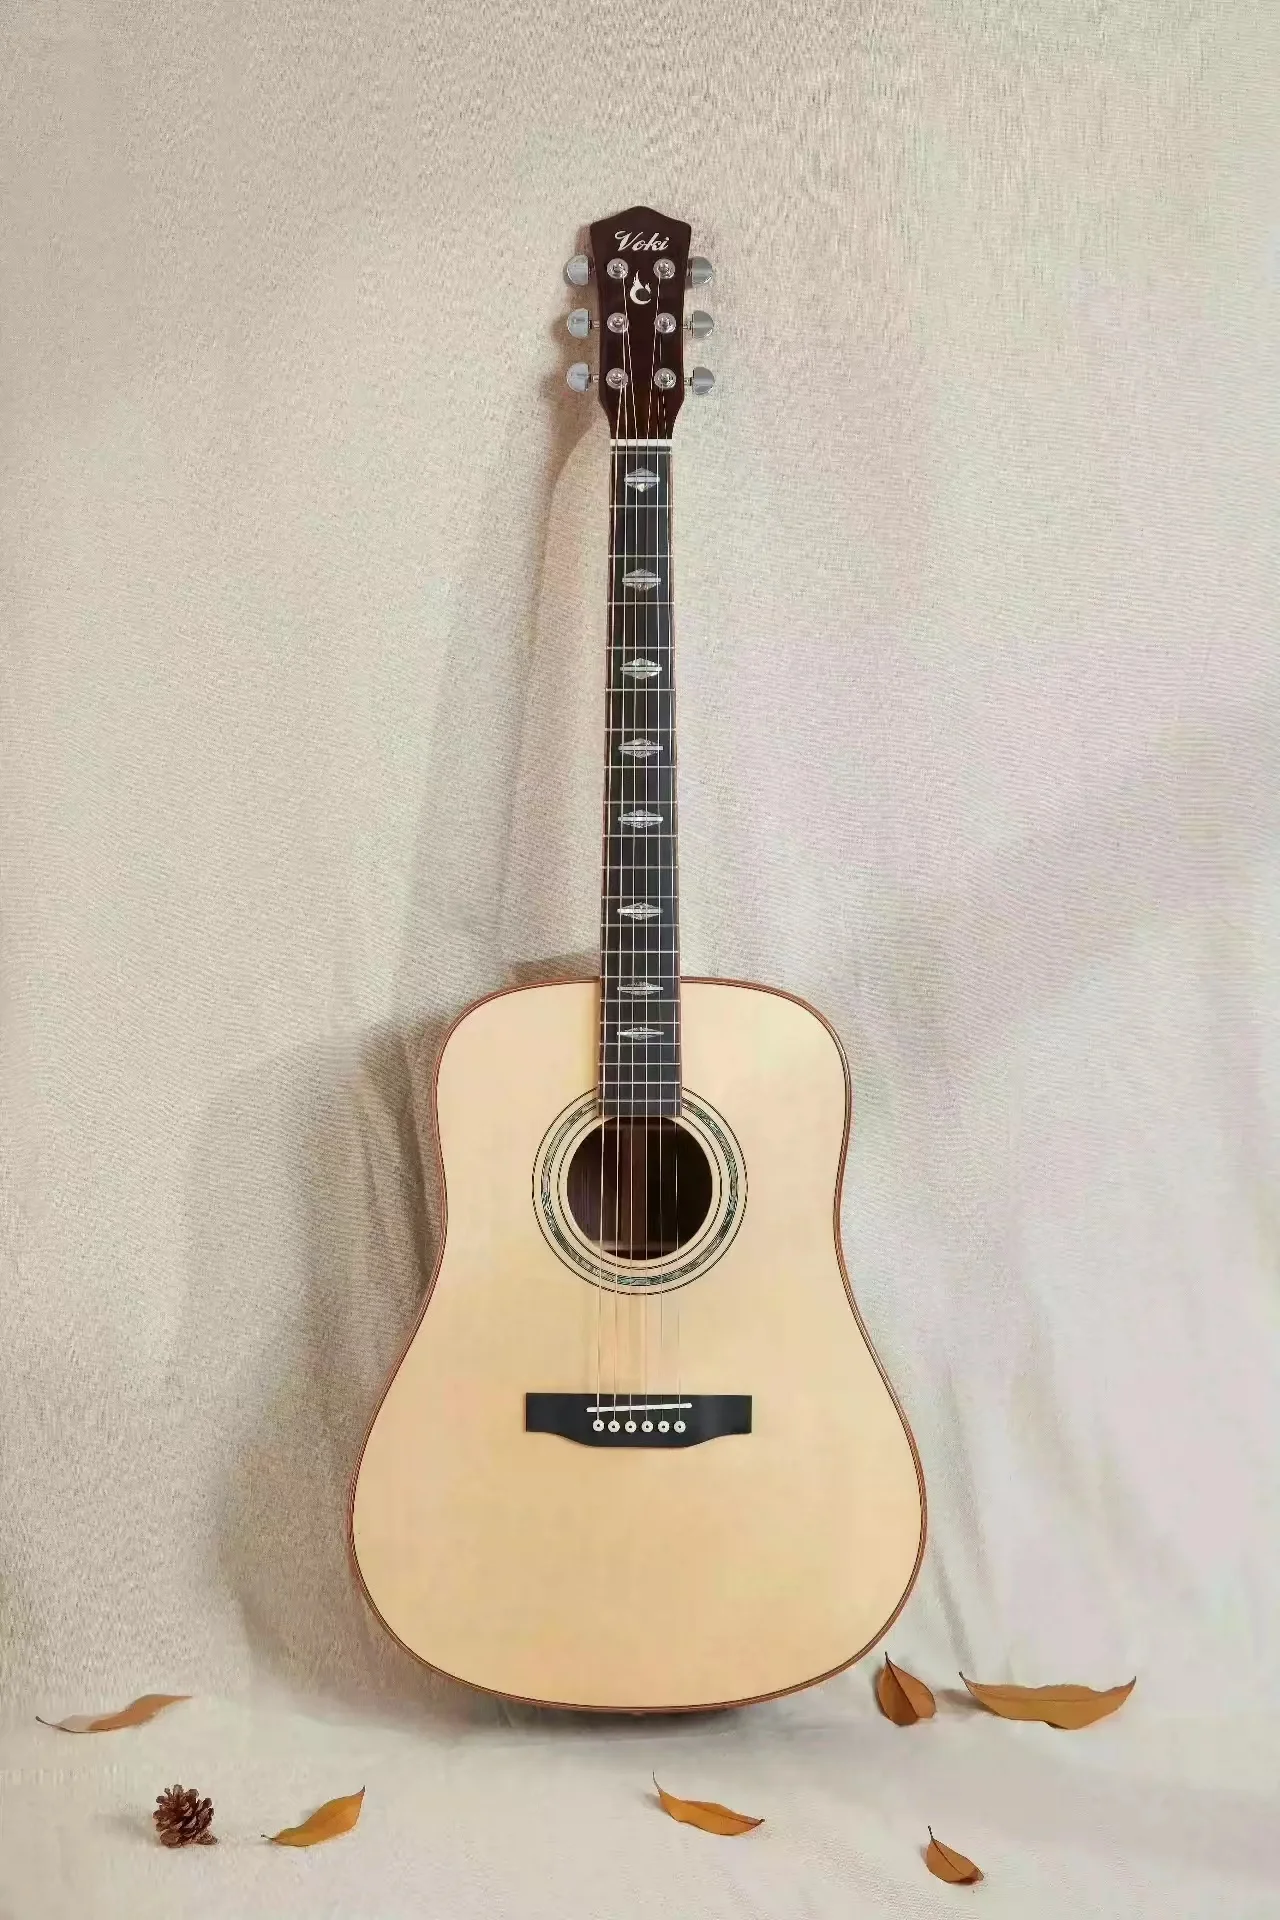 

VOKI Solid wood section folk acoustic guitar refers to low string pitch